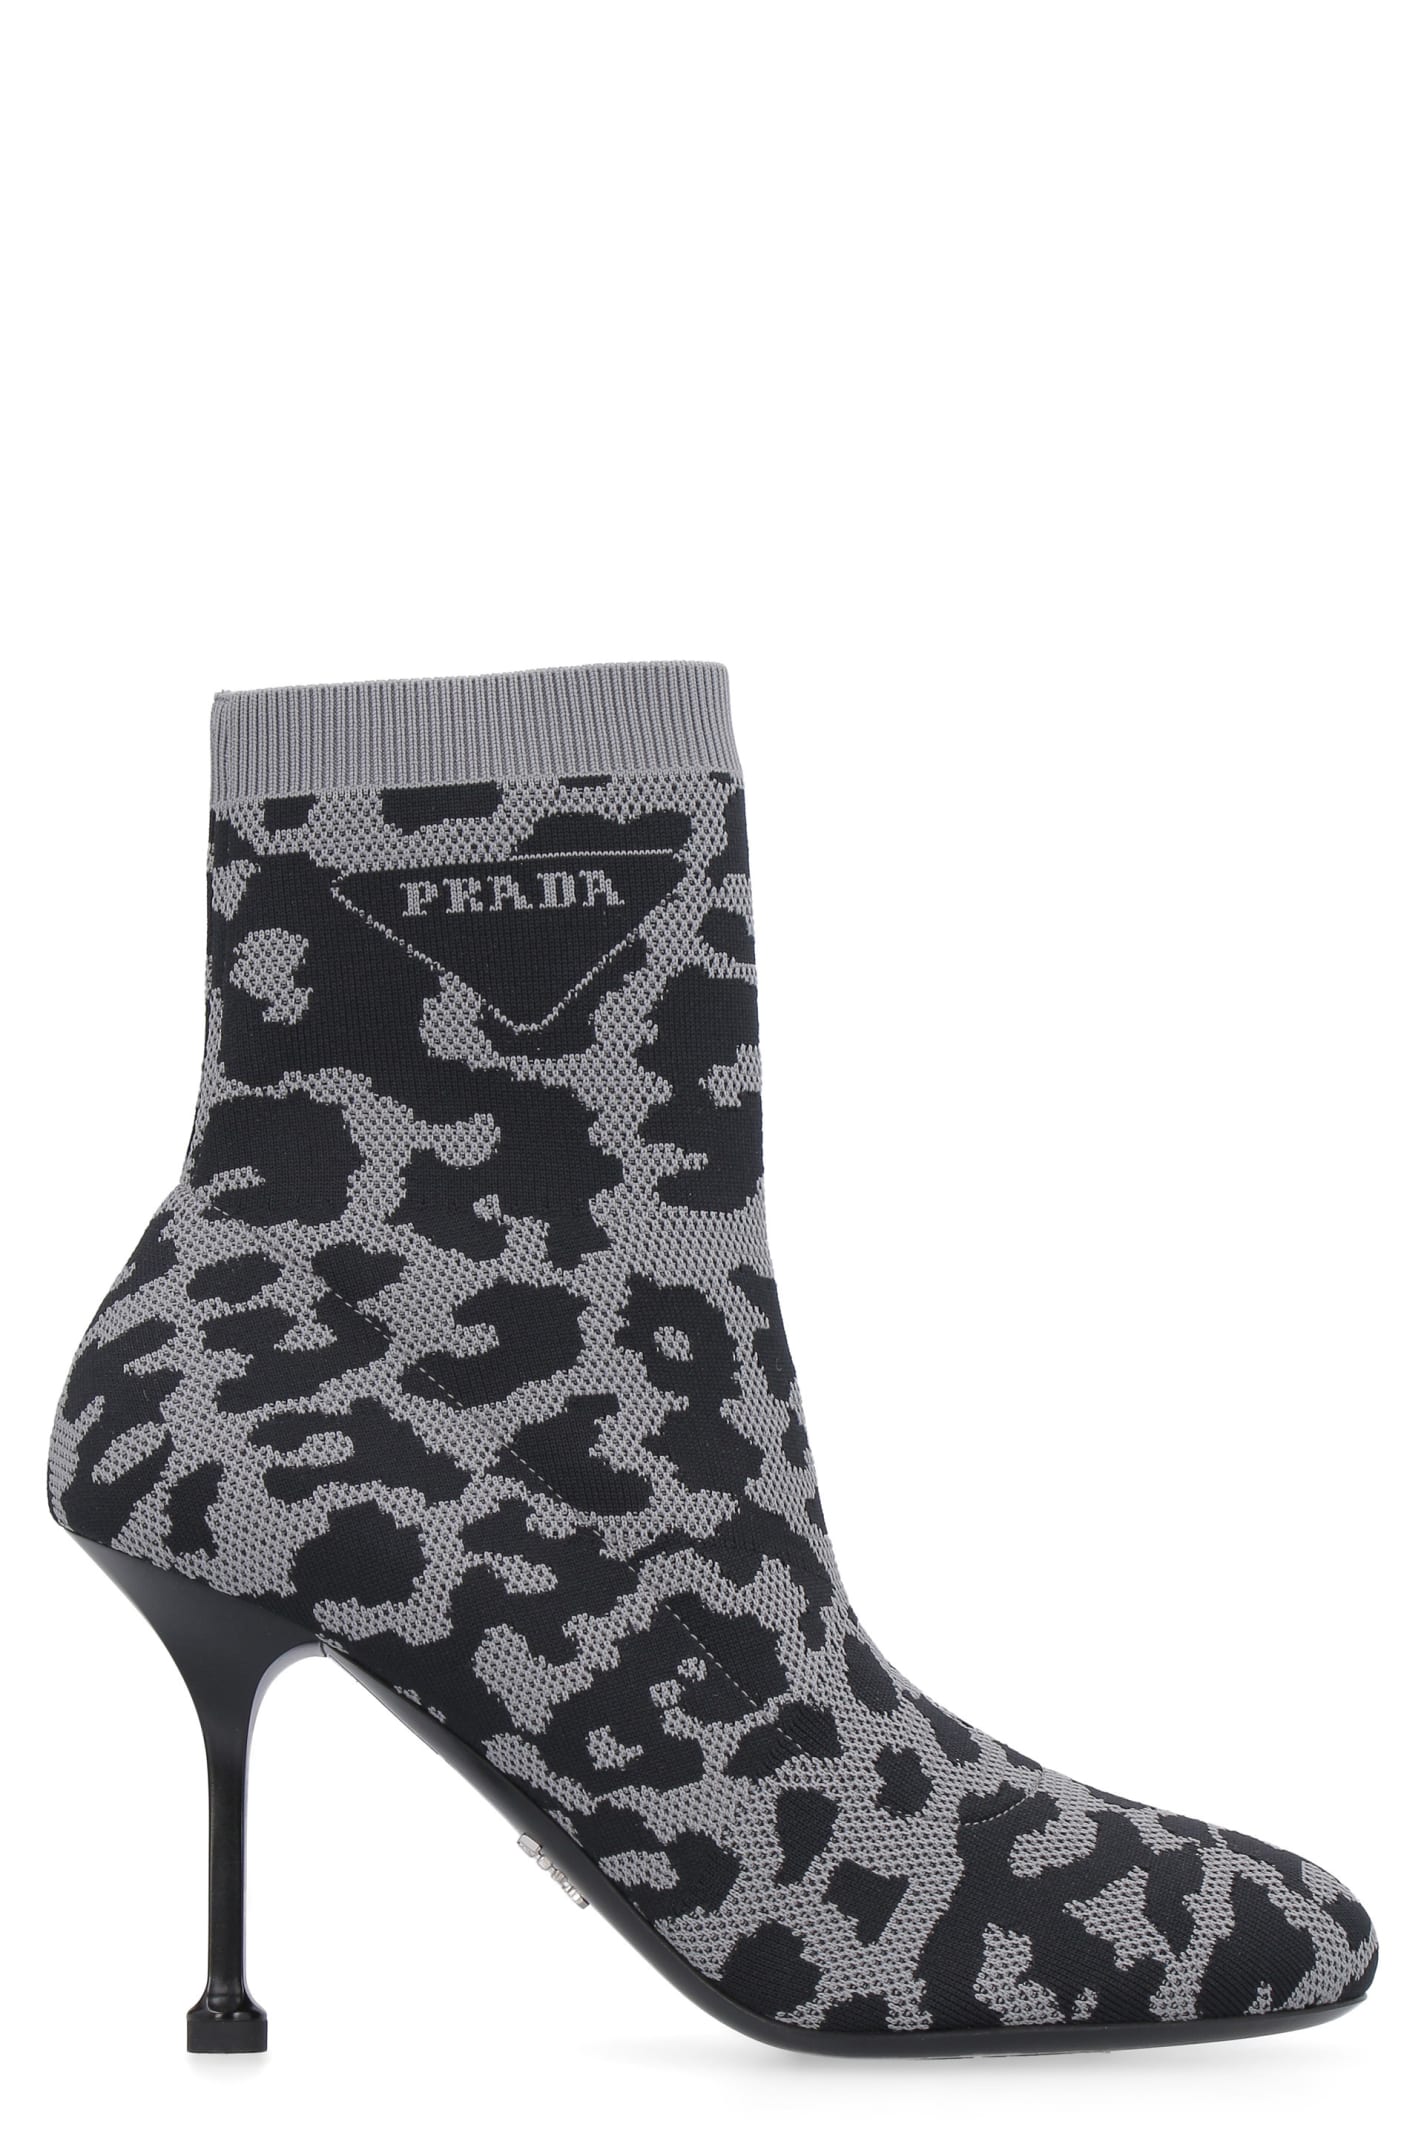 Buy Prada Knitted Ankle Boots online, shop Prada shoes with free shipping